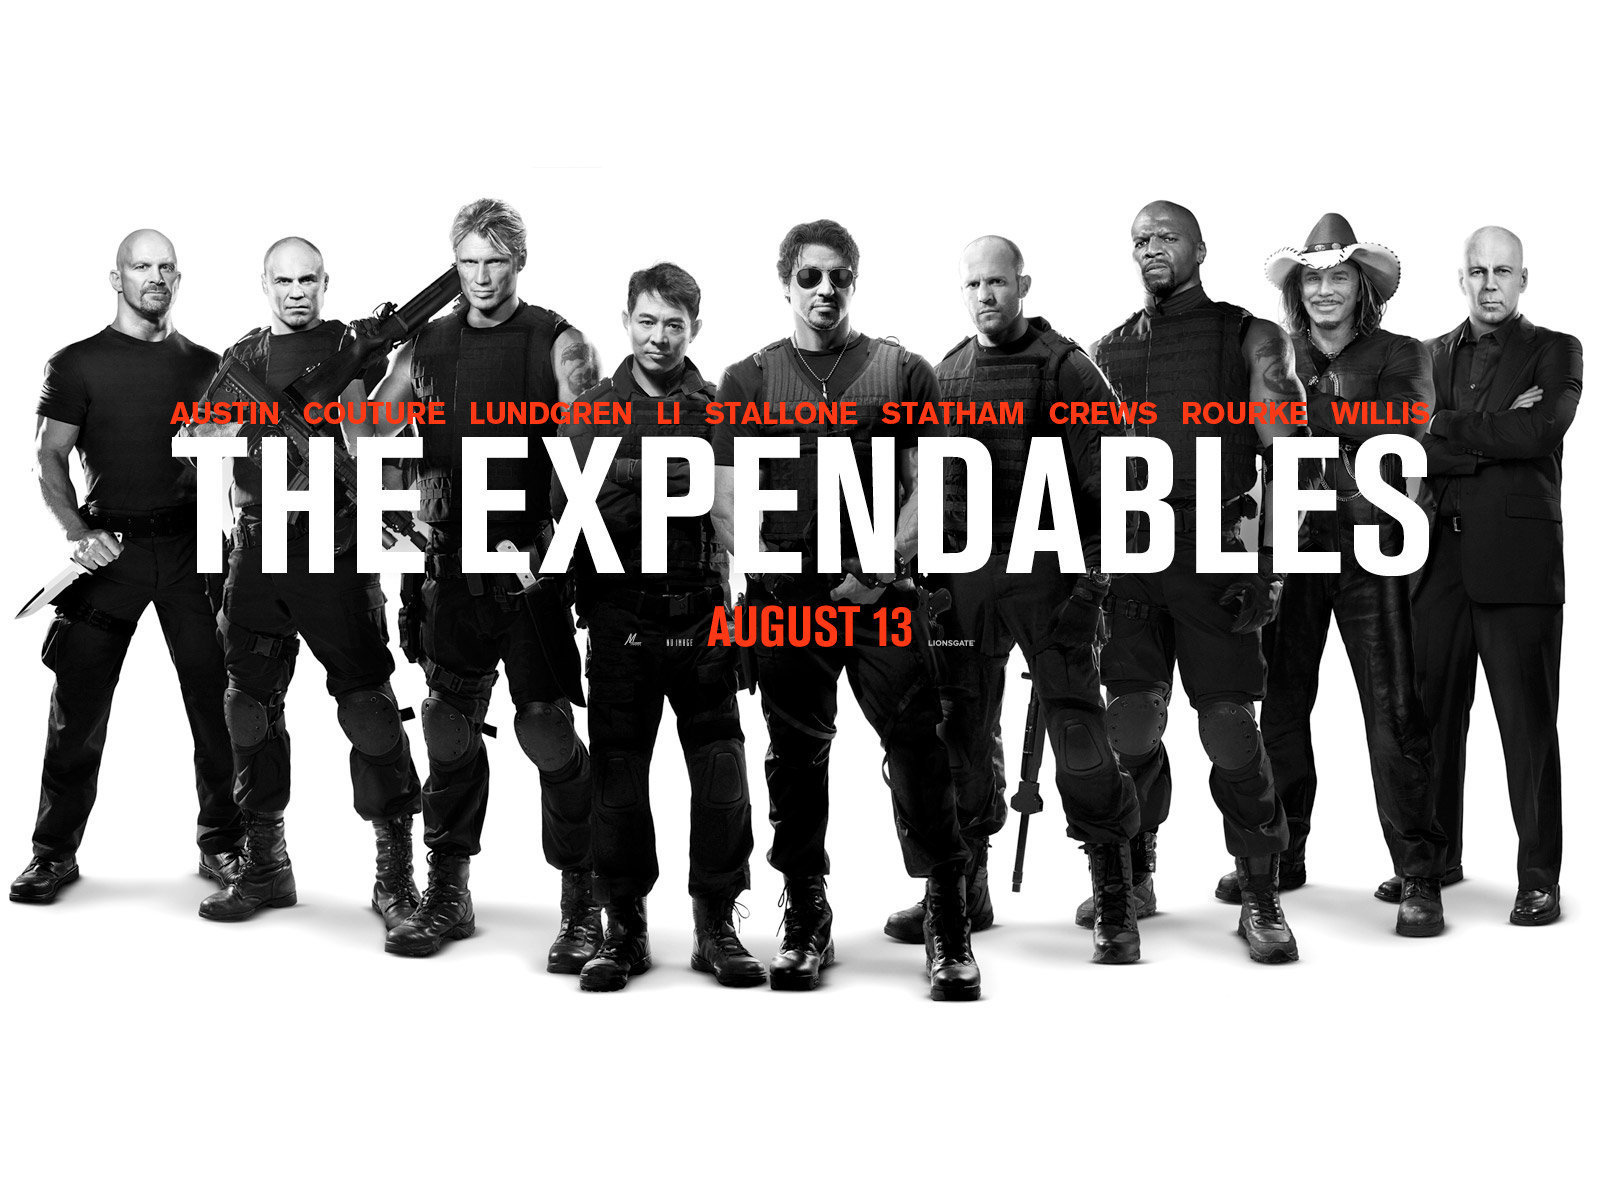 The Expendables - Expendables 1 - HD Wallpaper 